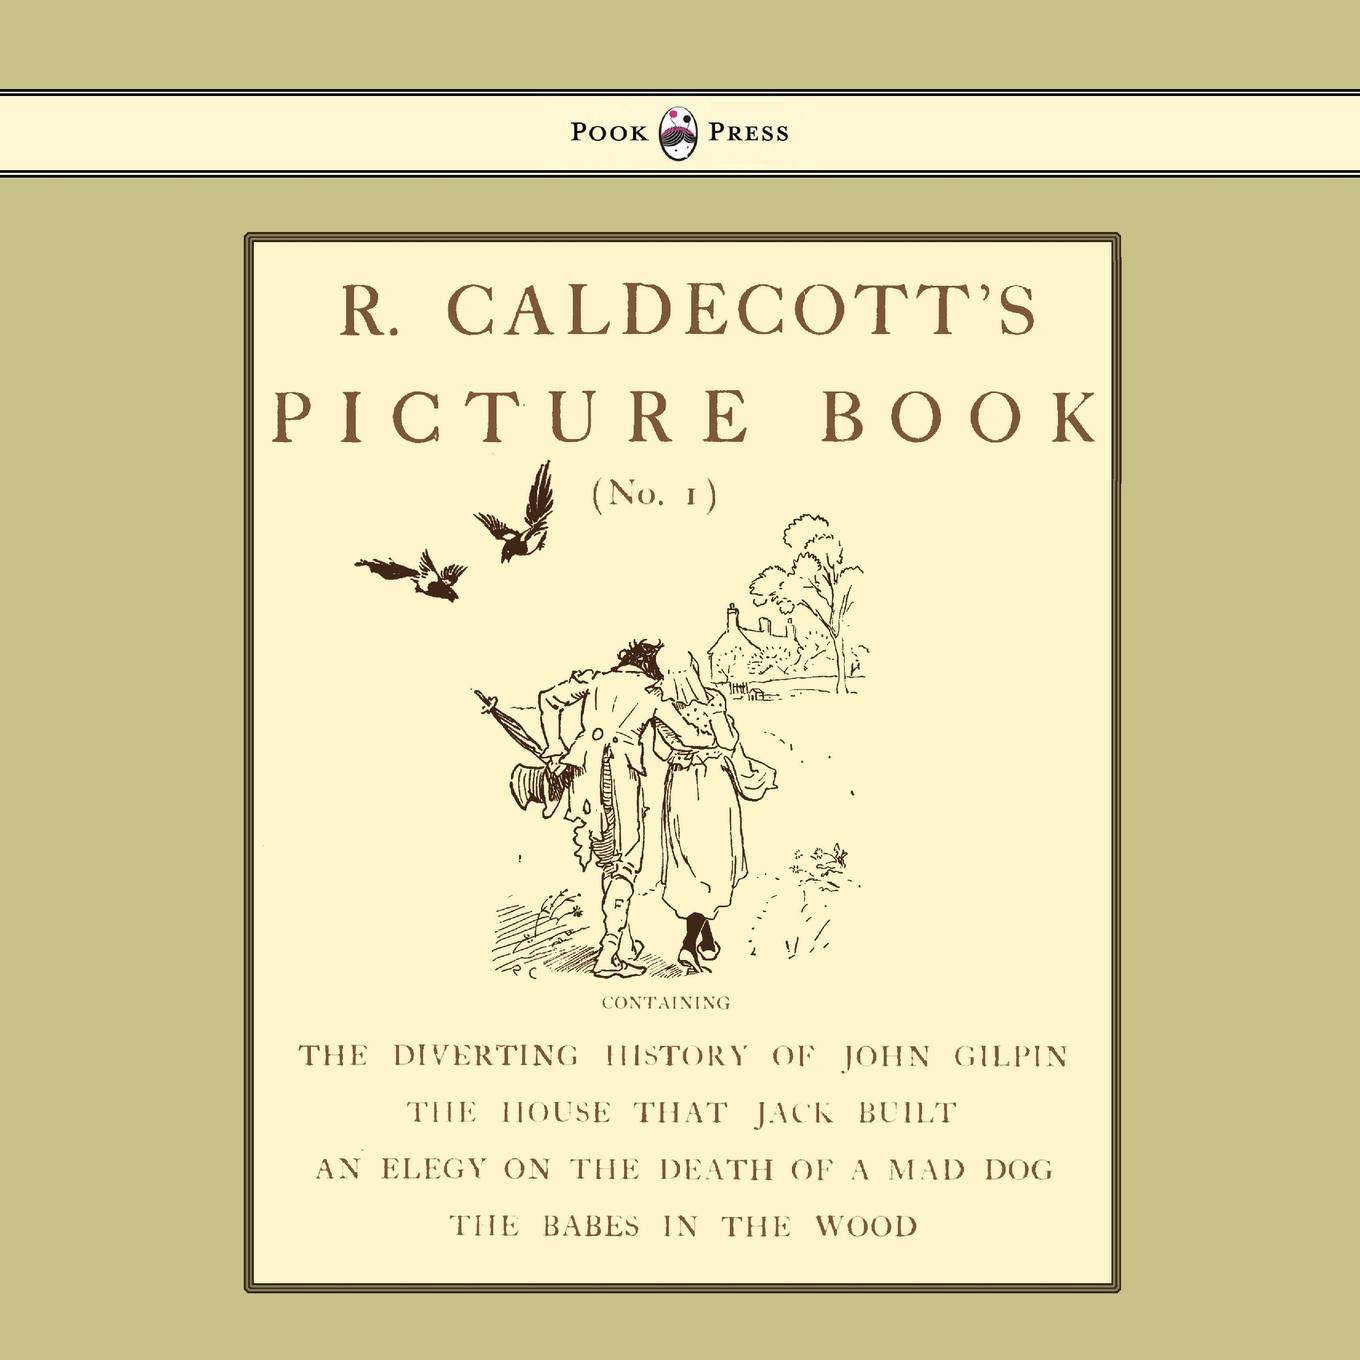 R. Caldecott s Picture Book - No. 1 - Containing the Diverting History of John Gilpin, the House That Jack Built, an Elegy on the Death of a Mad Dog,